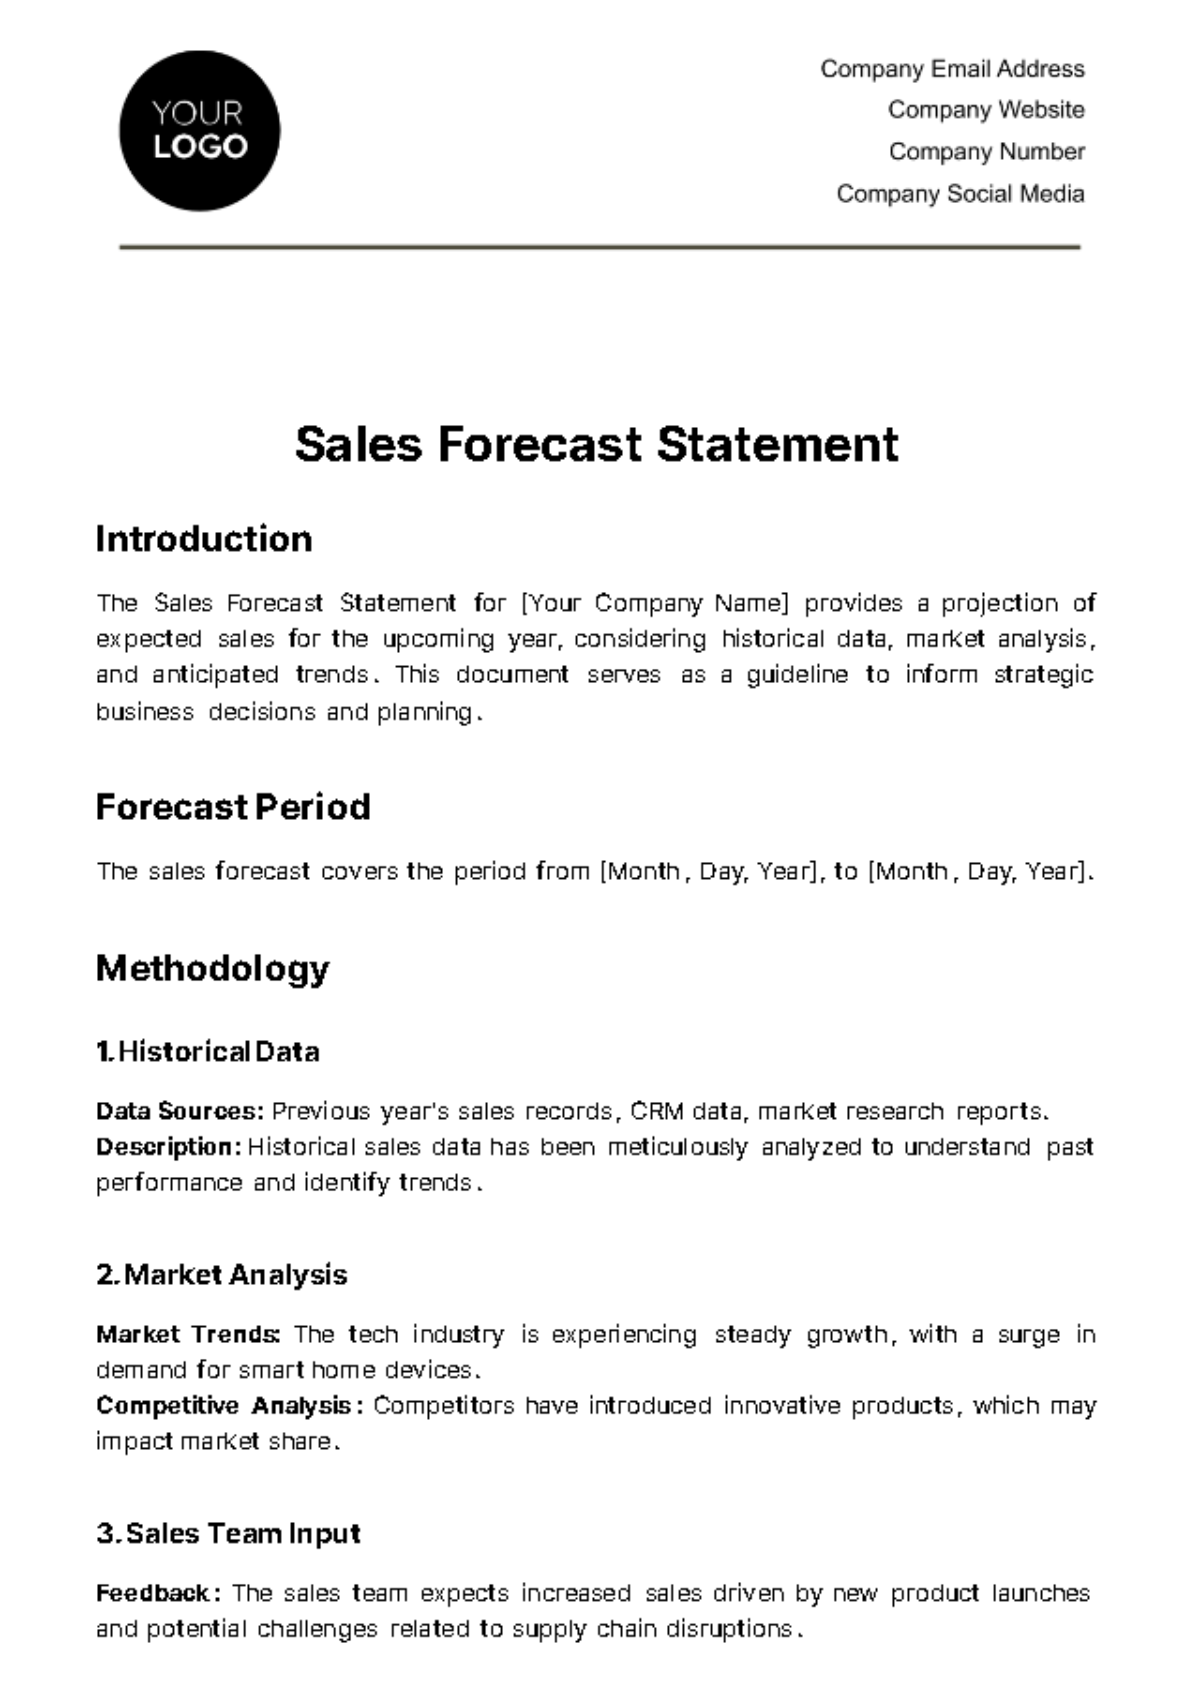 Free Sales Forecast Statement Template